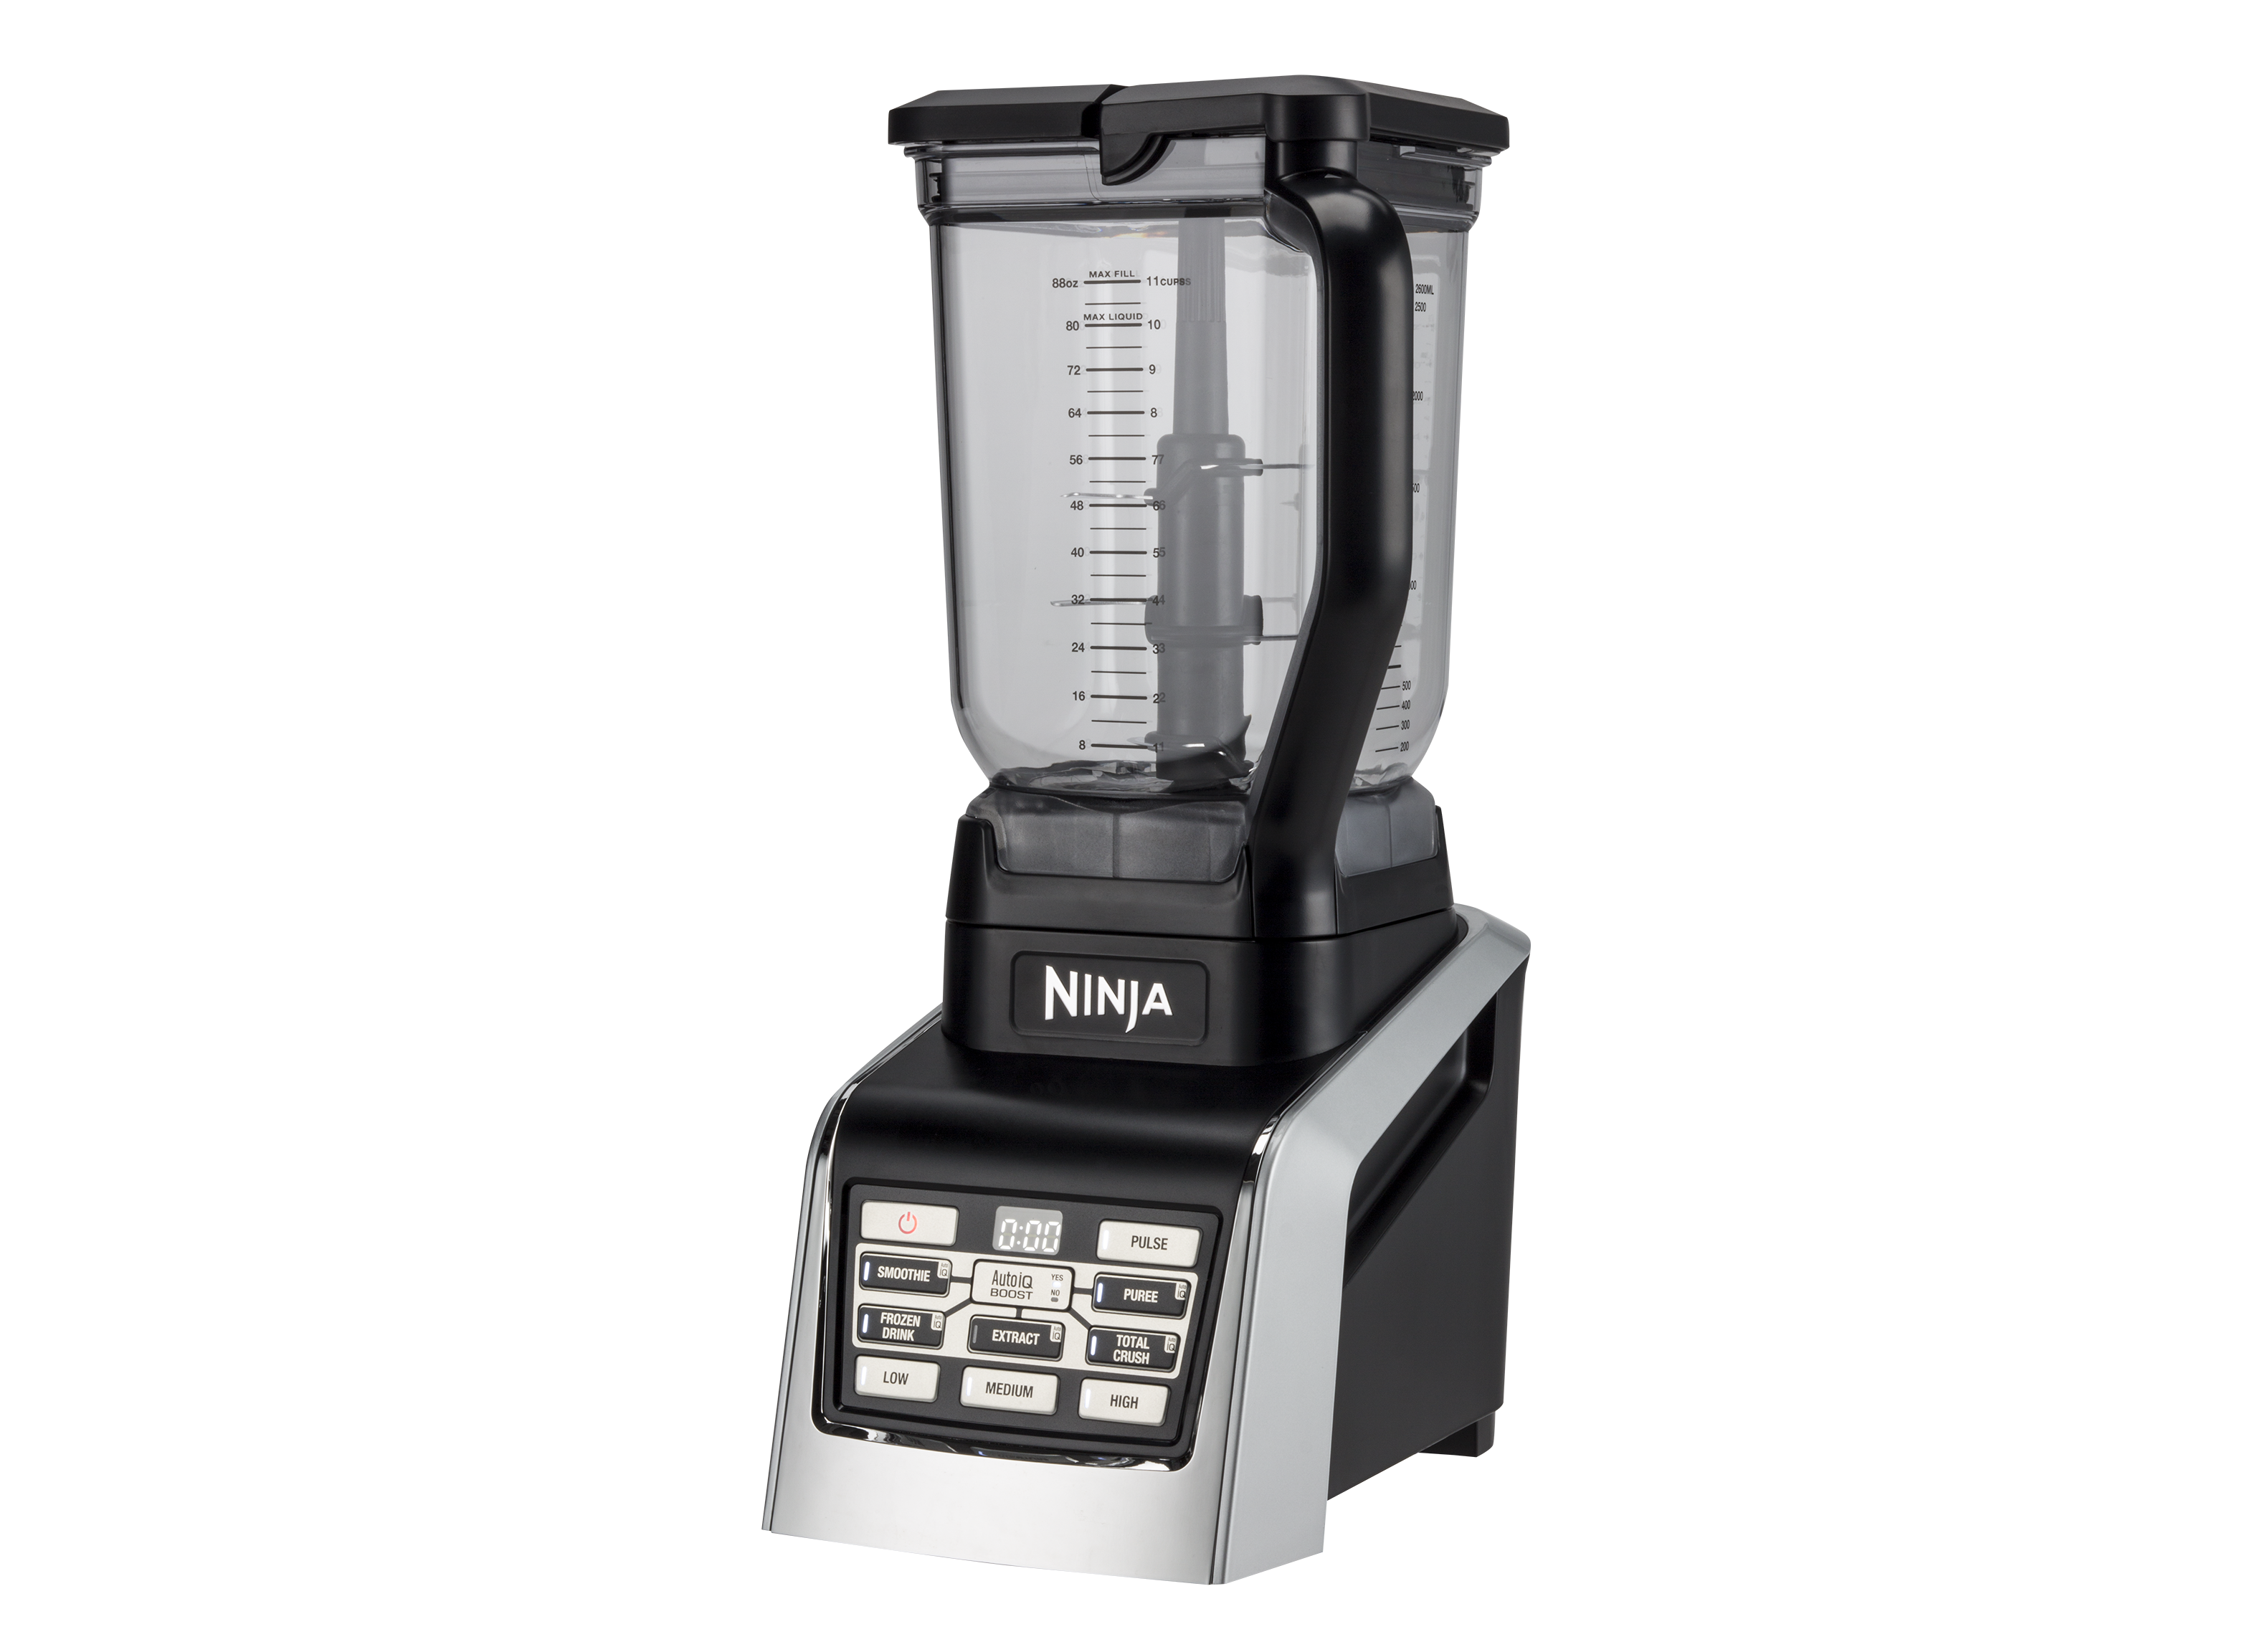 https://crdms.images.consumerreports.org/prod/products/cr/models/388193-blenders-ninja-blendmaxduowithautoiqboostbl2013.png